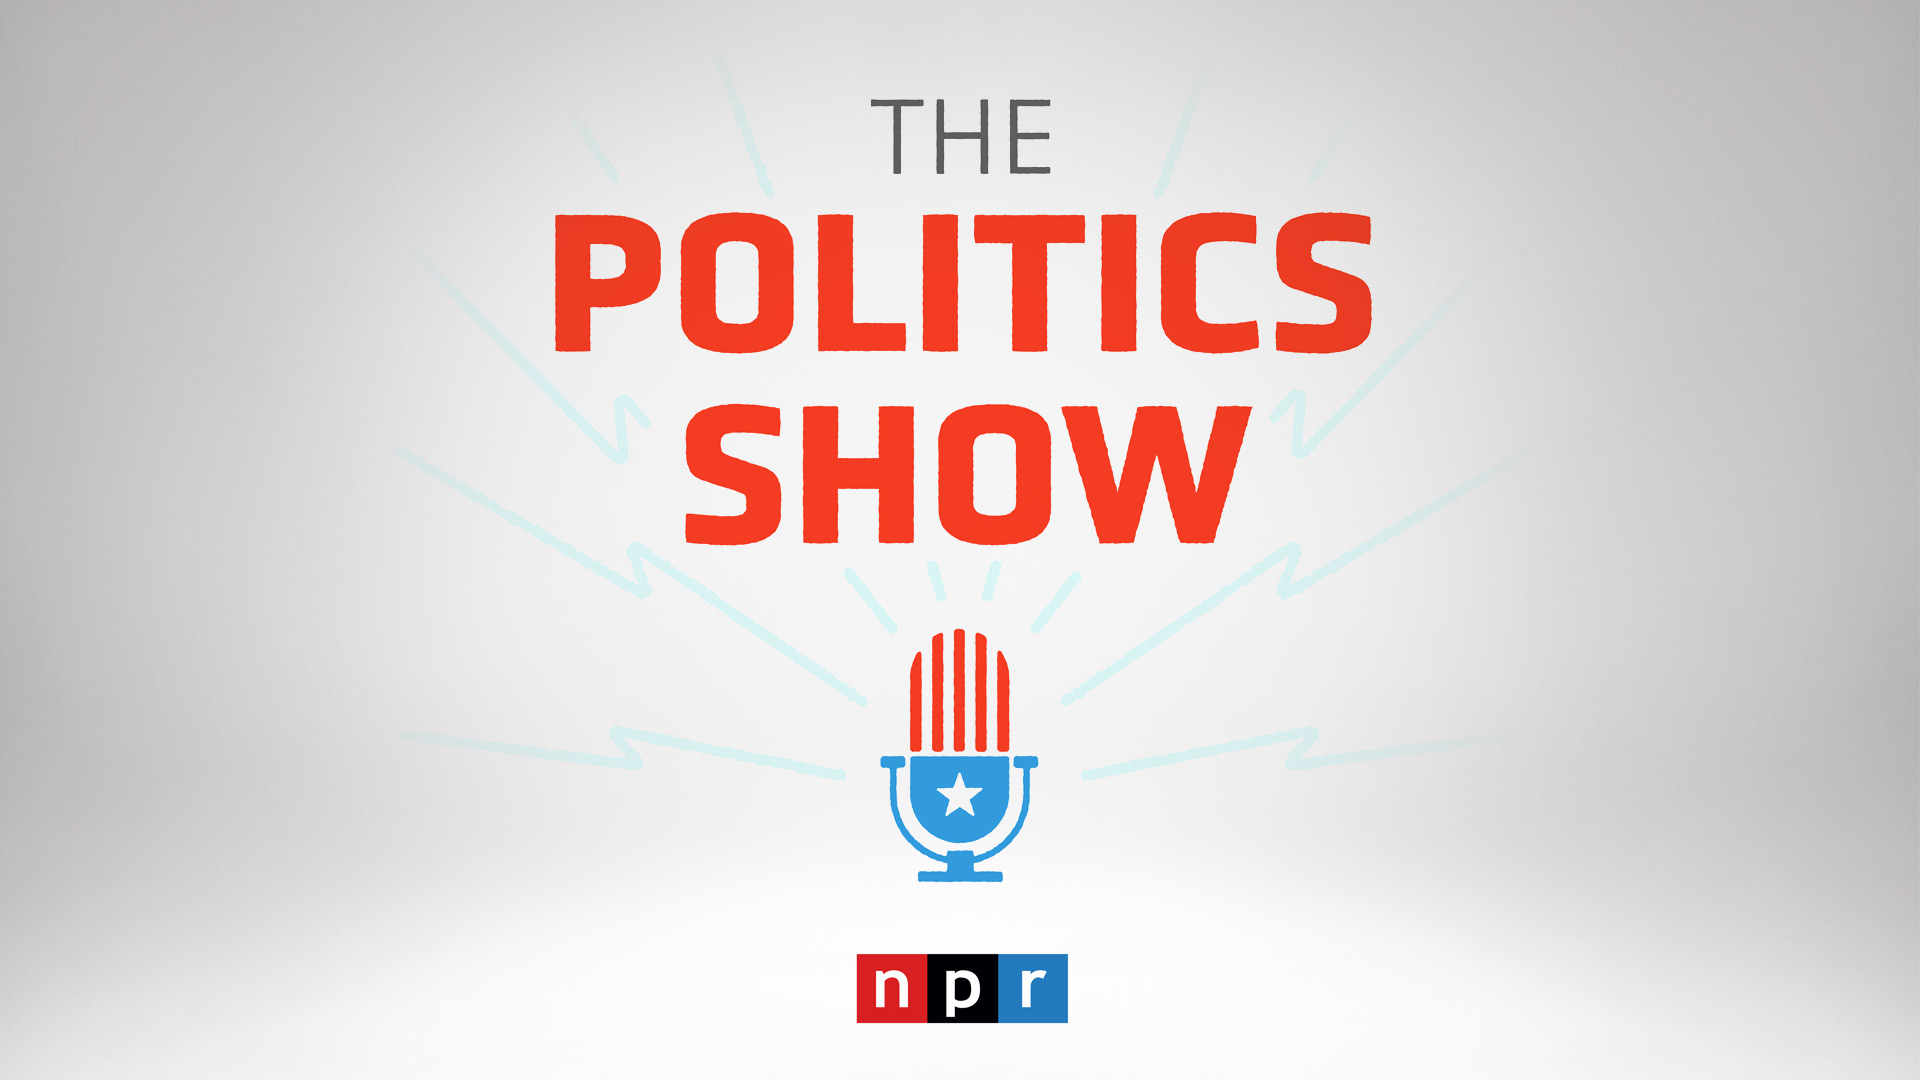 The Politics Show from NPR is the definitive guide to the 2018 midterms. It airs each Saturday at 5 p.m. on NPR 89.1.